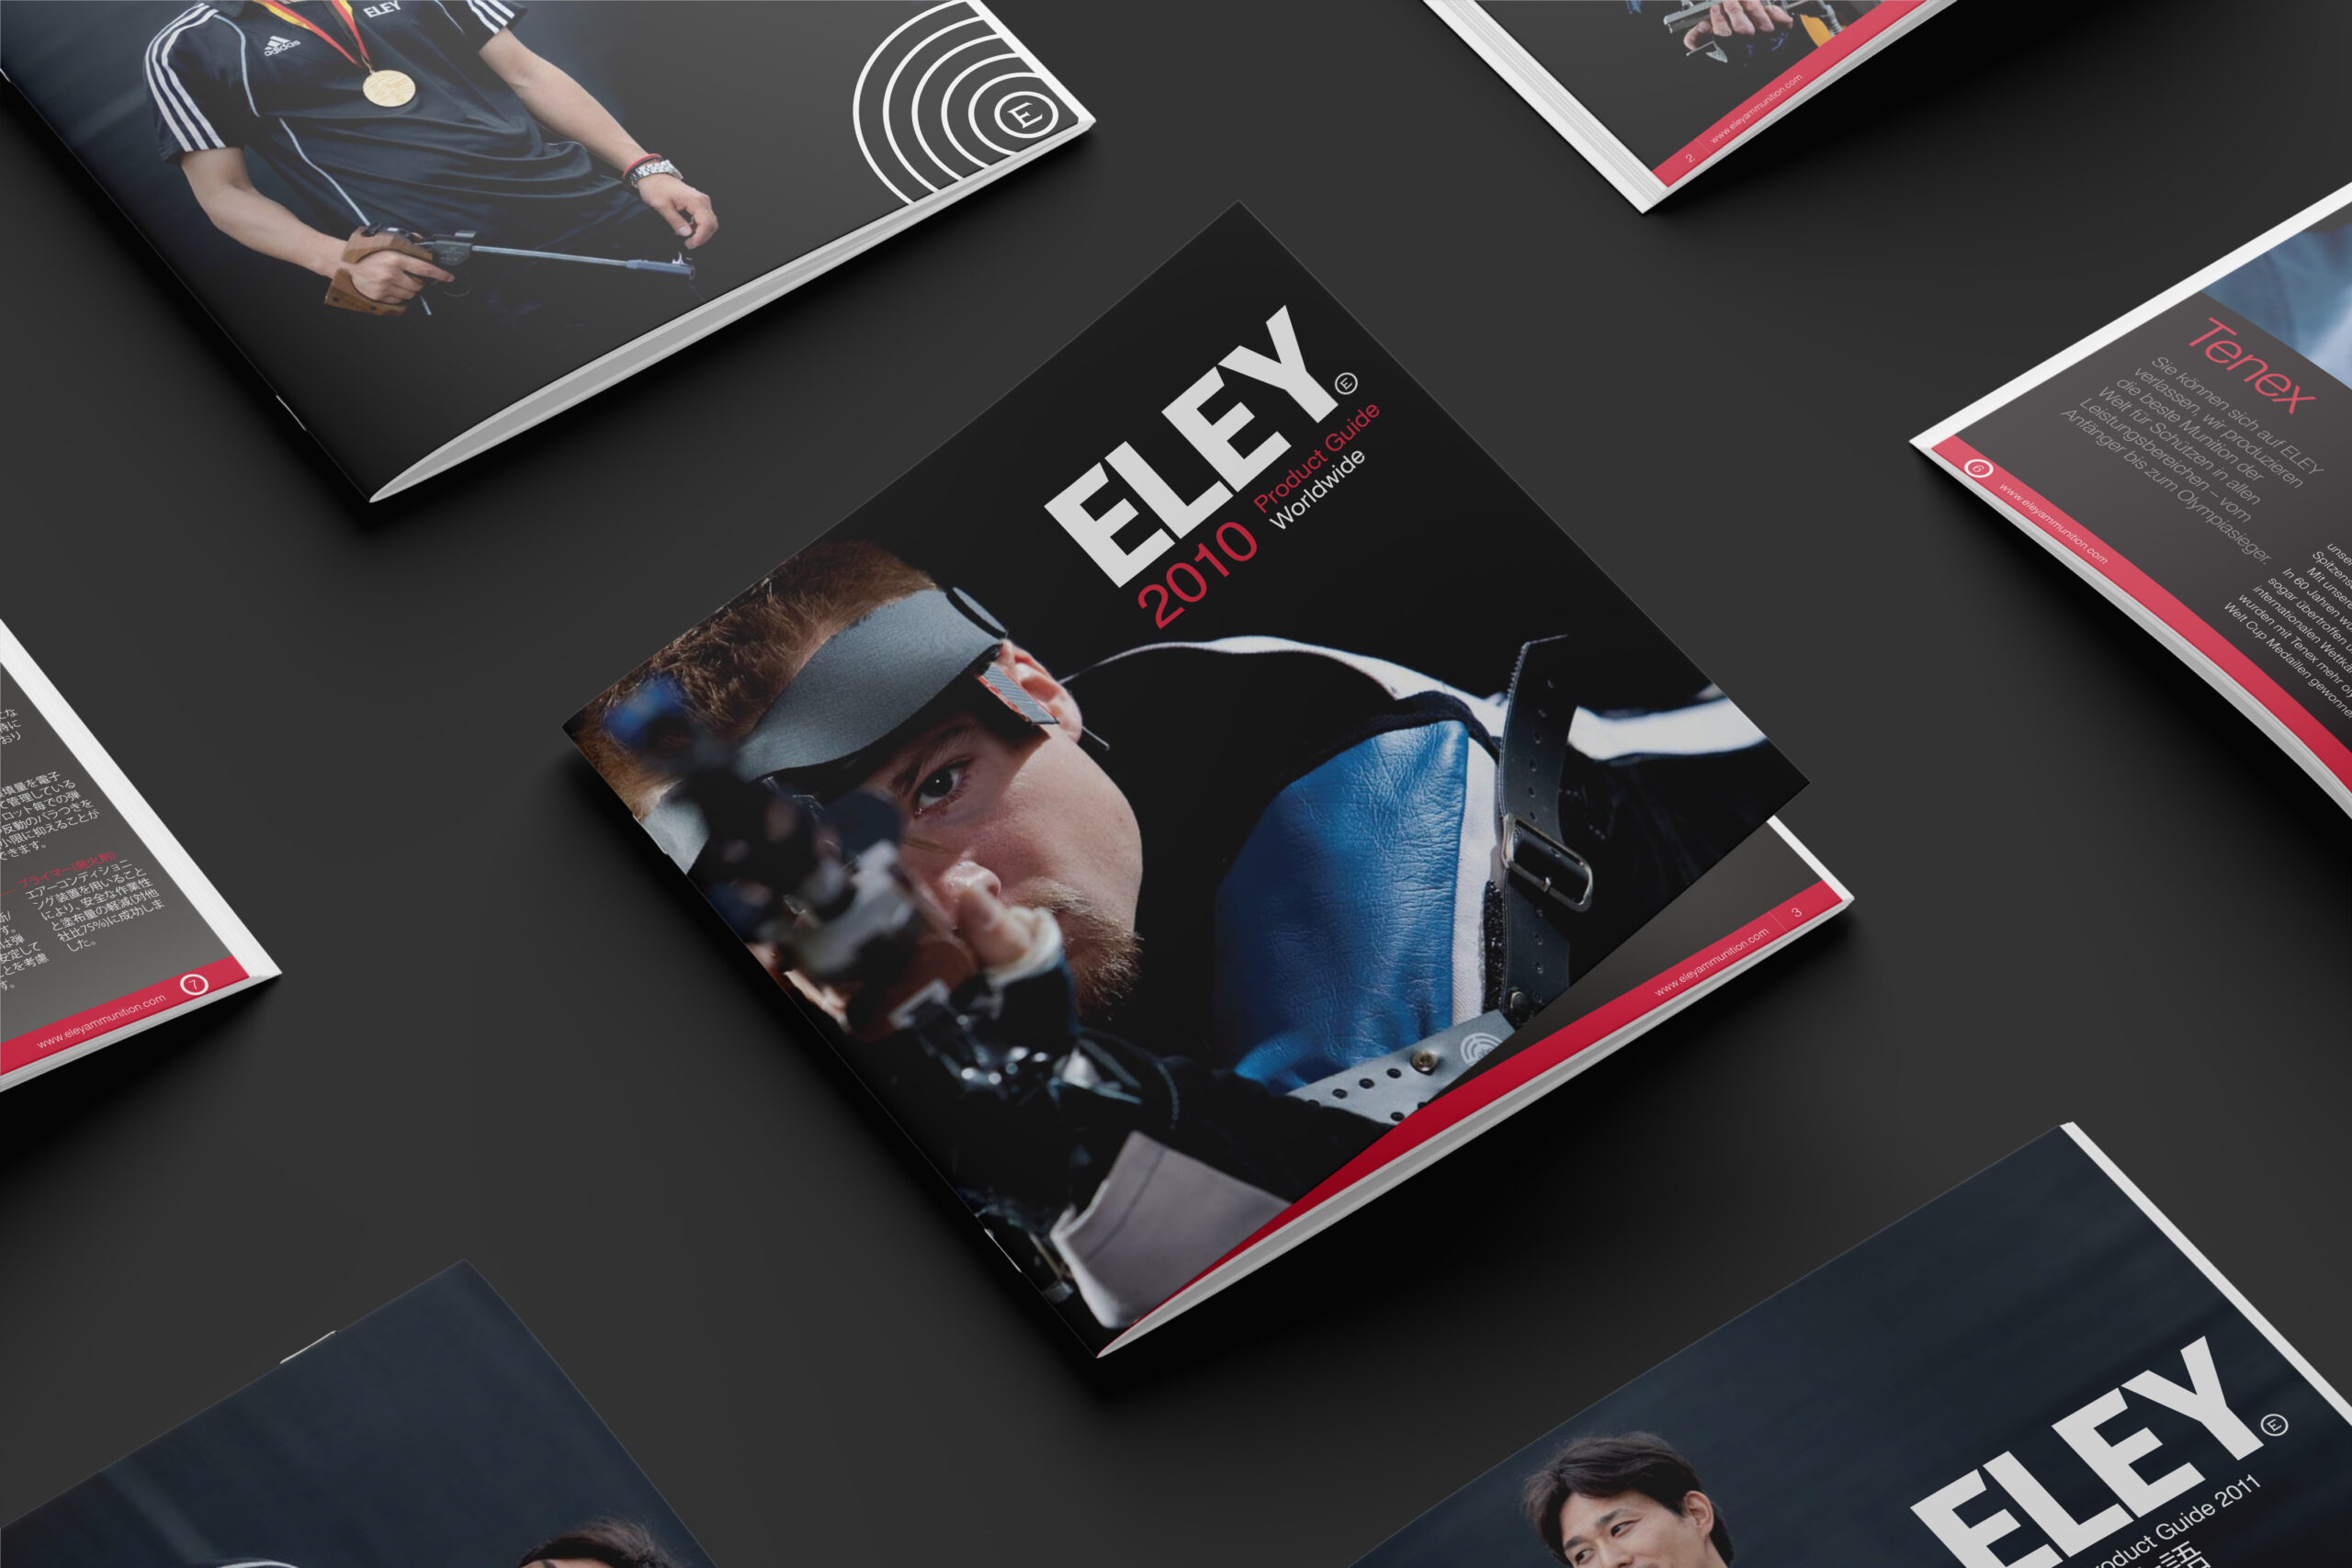 A selection of Eley product guides are arranged in a grid on a dark background. At the centre of the image is the 2010 Worldwide product guide with an image of a competitive rifle shooter taking aim.